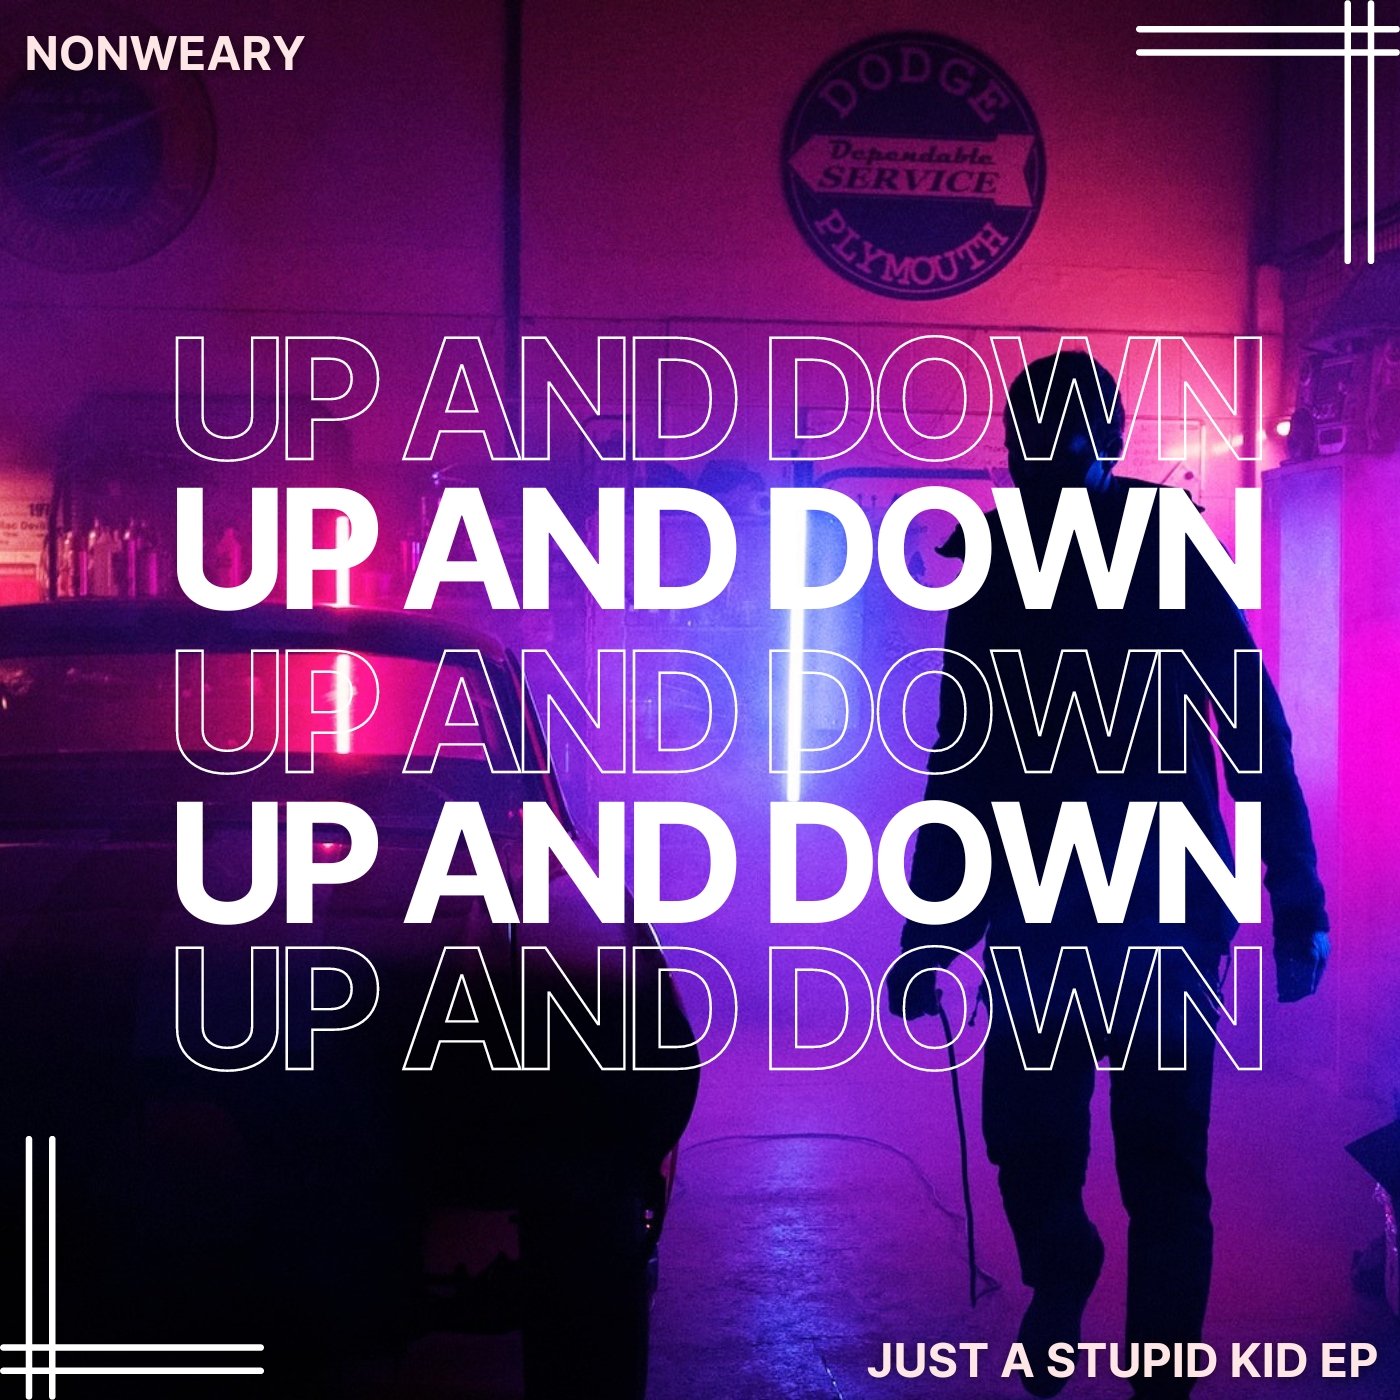 Up and Down - NonWeary - Scraps Audio